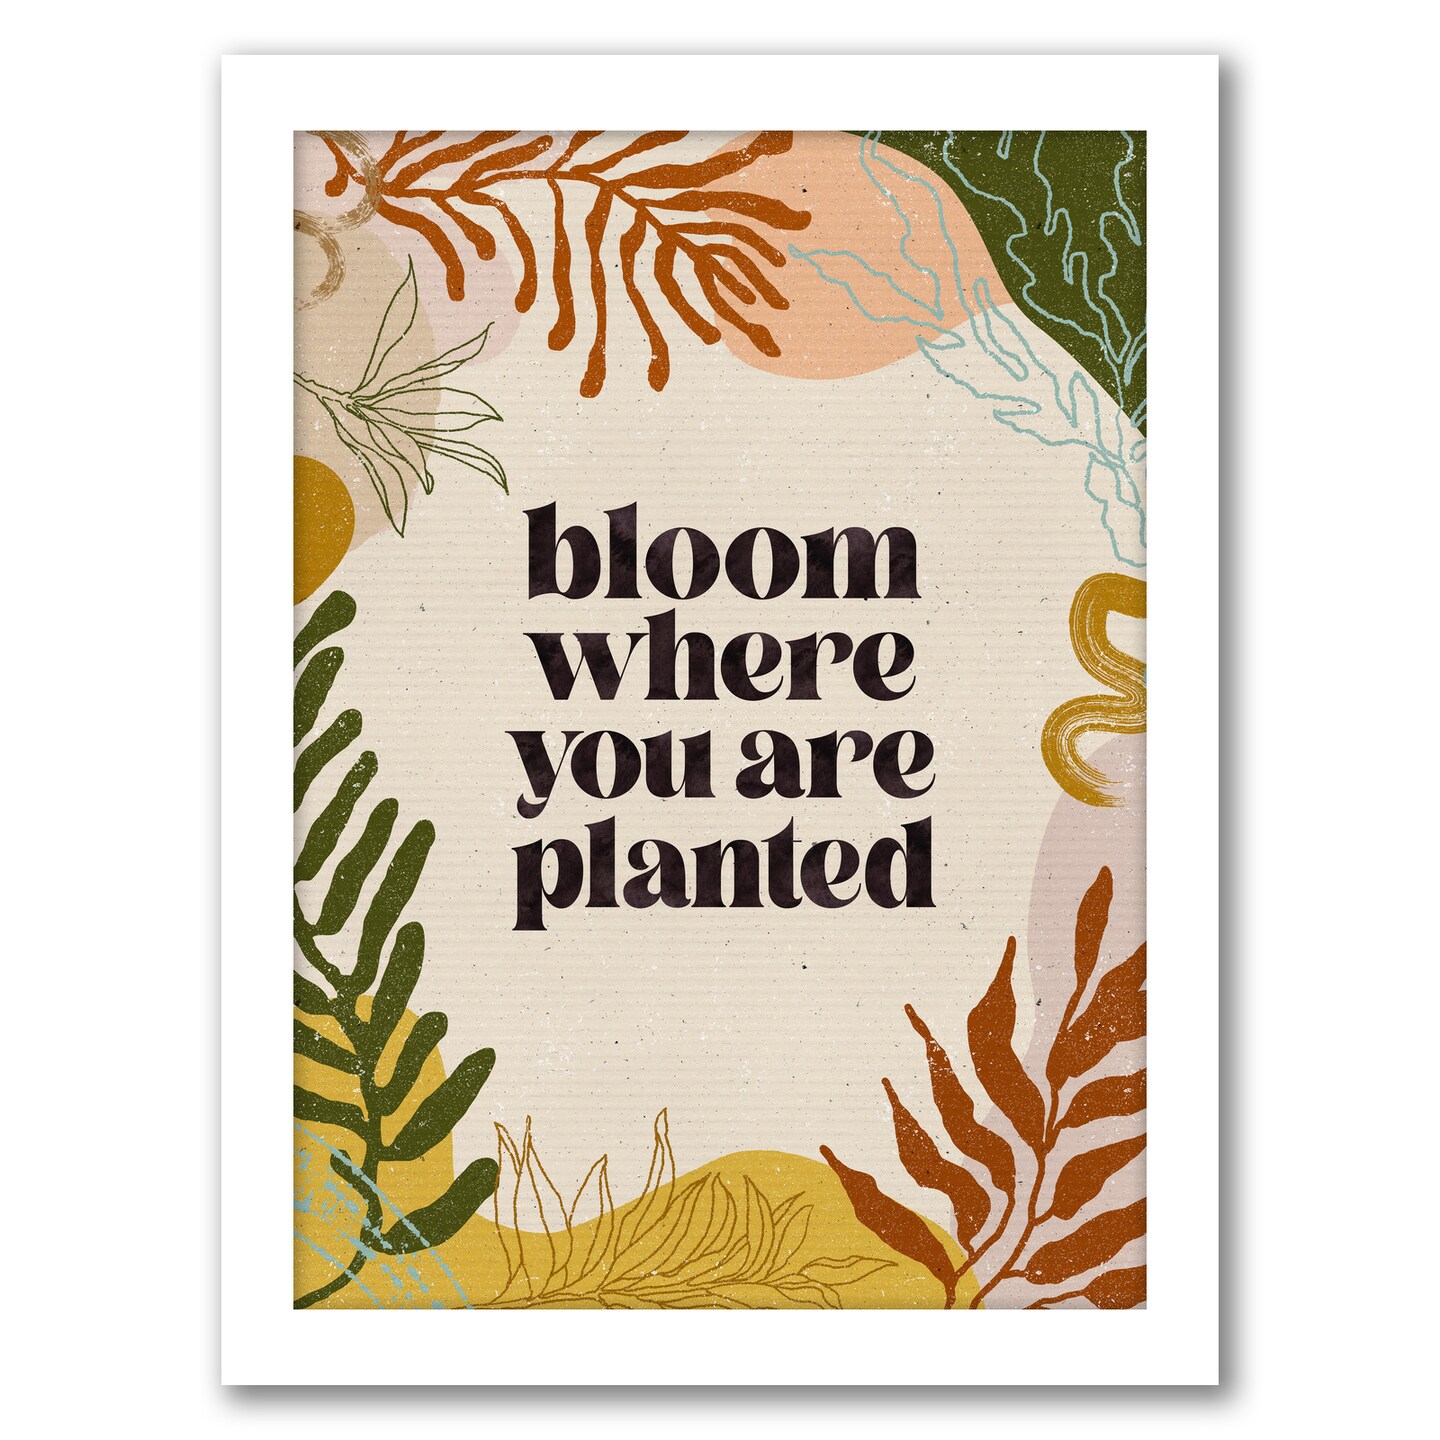 Bloom Where You Are Planted by Elena David Frame  - Americanflat